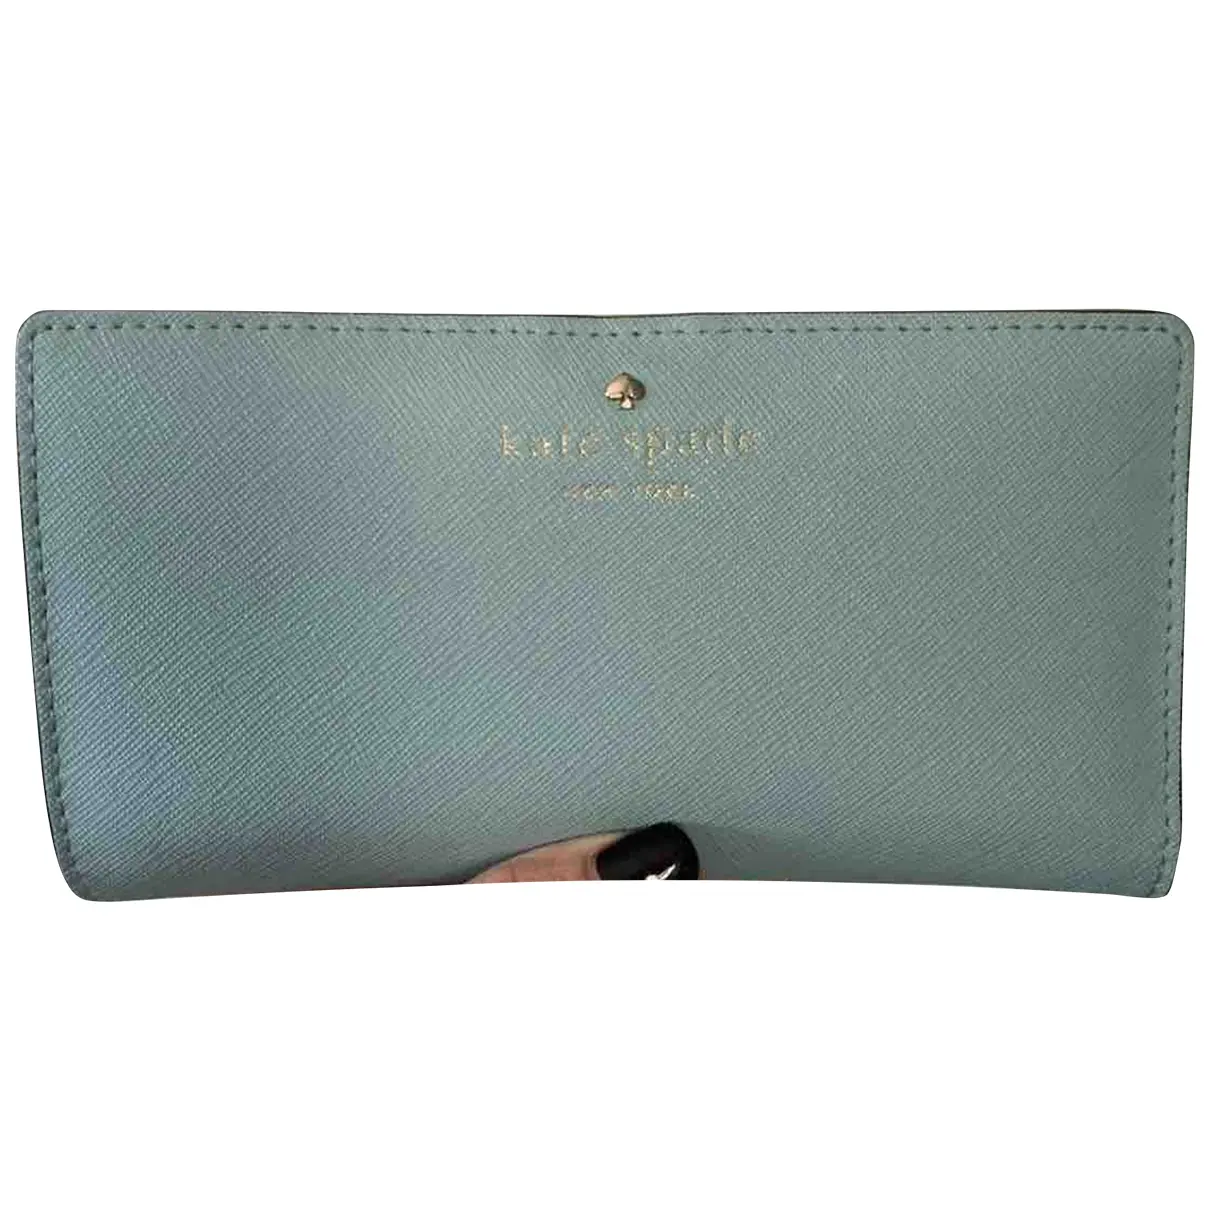 Patent leather wallet Kate Spade